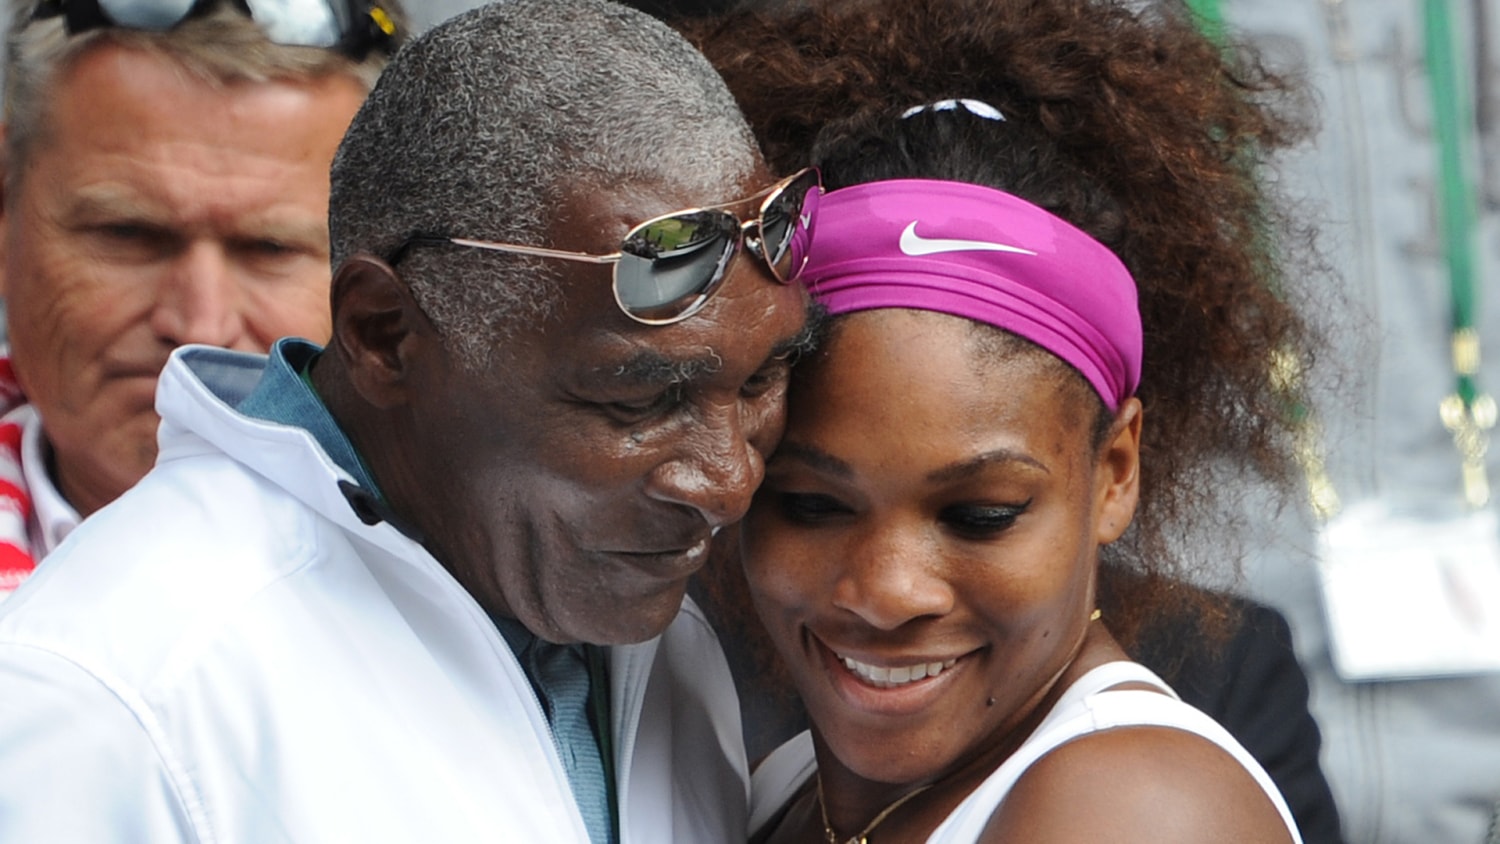 Serena Williams' Dad Pulled Out of Wedding One Hour Before